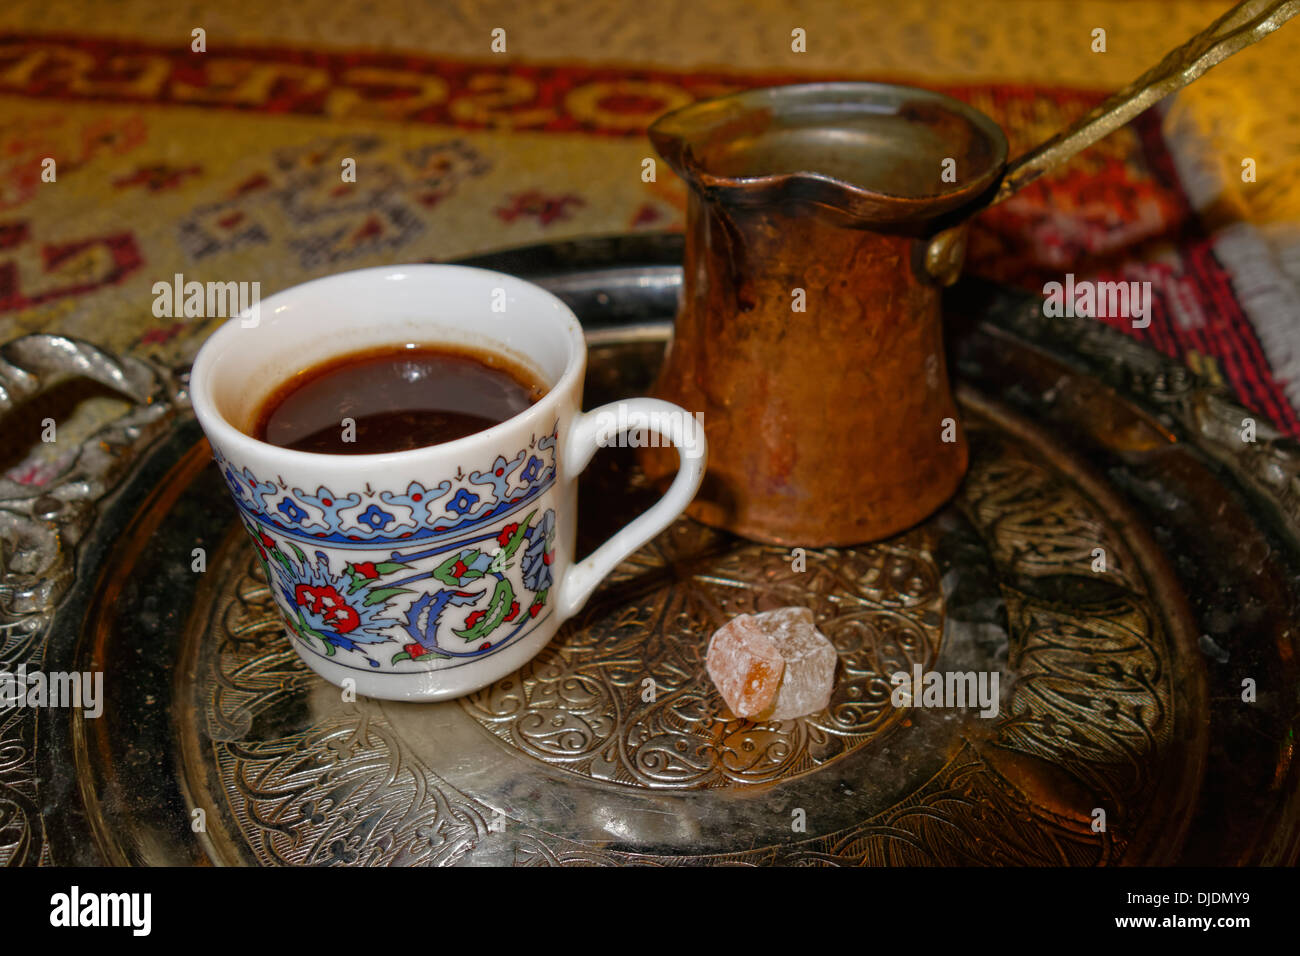 Turkish coffee in a cup with Turkish delight, Dalyan, Aegean, Turkey Stock Photo